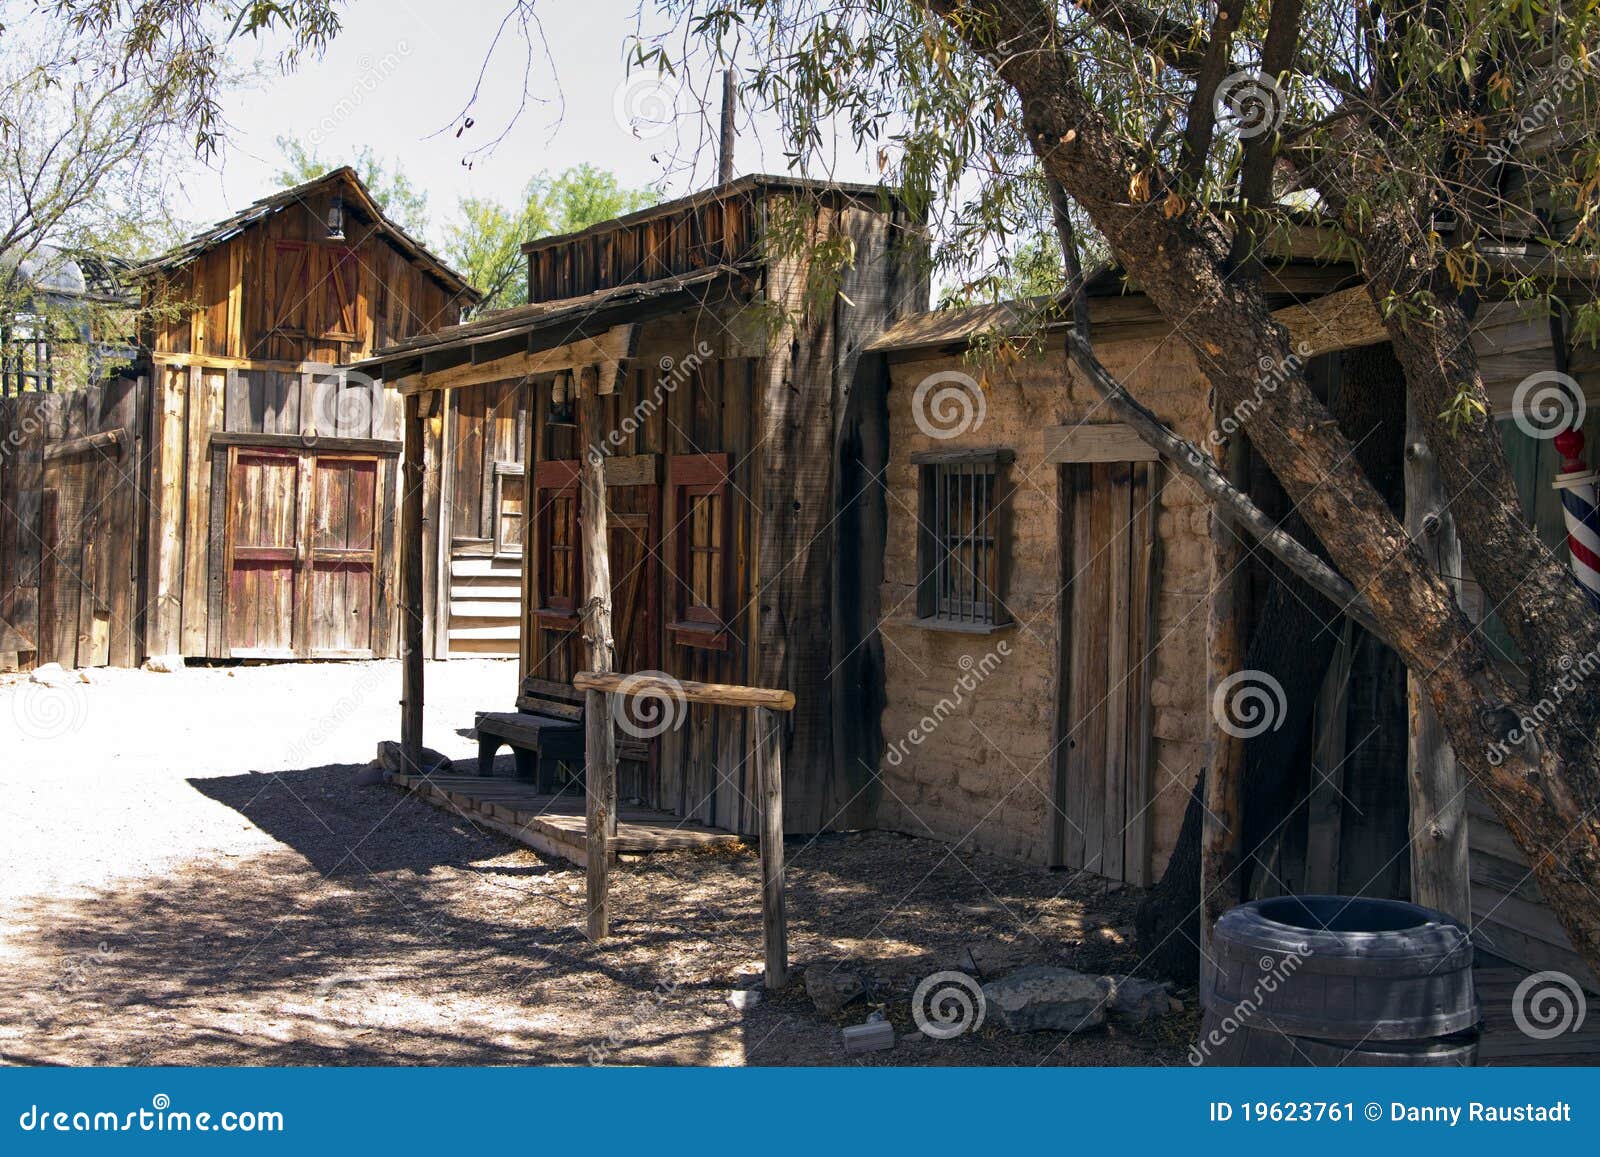 old wild west cowboy town usa stock image - image: 19623761